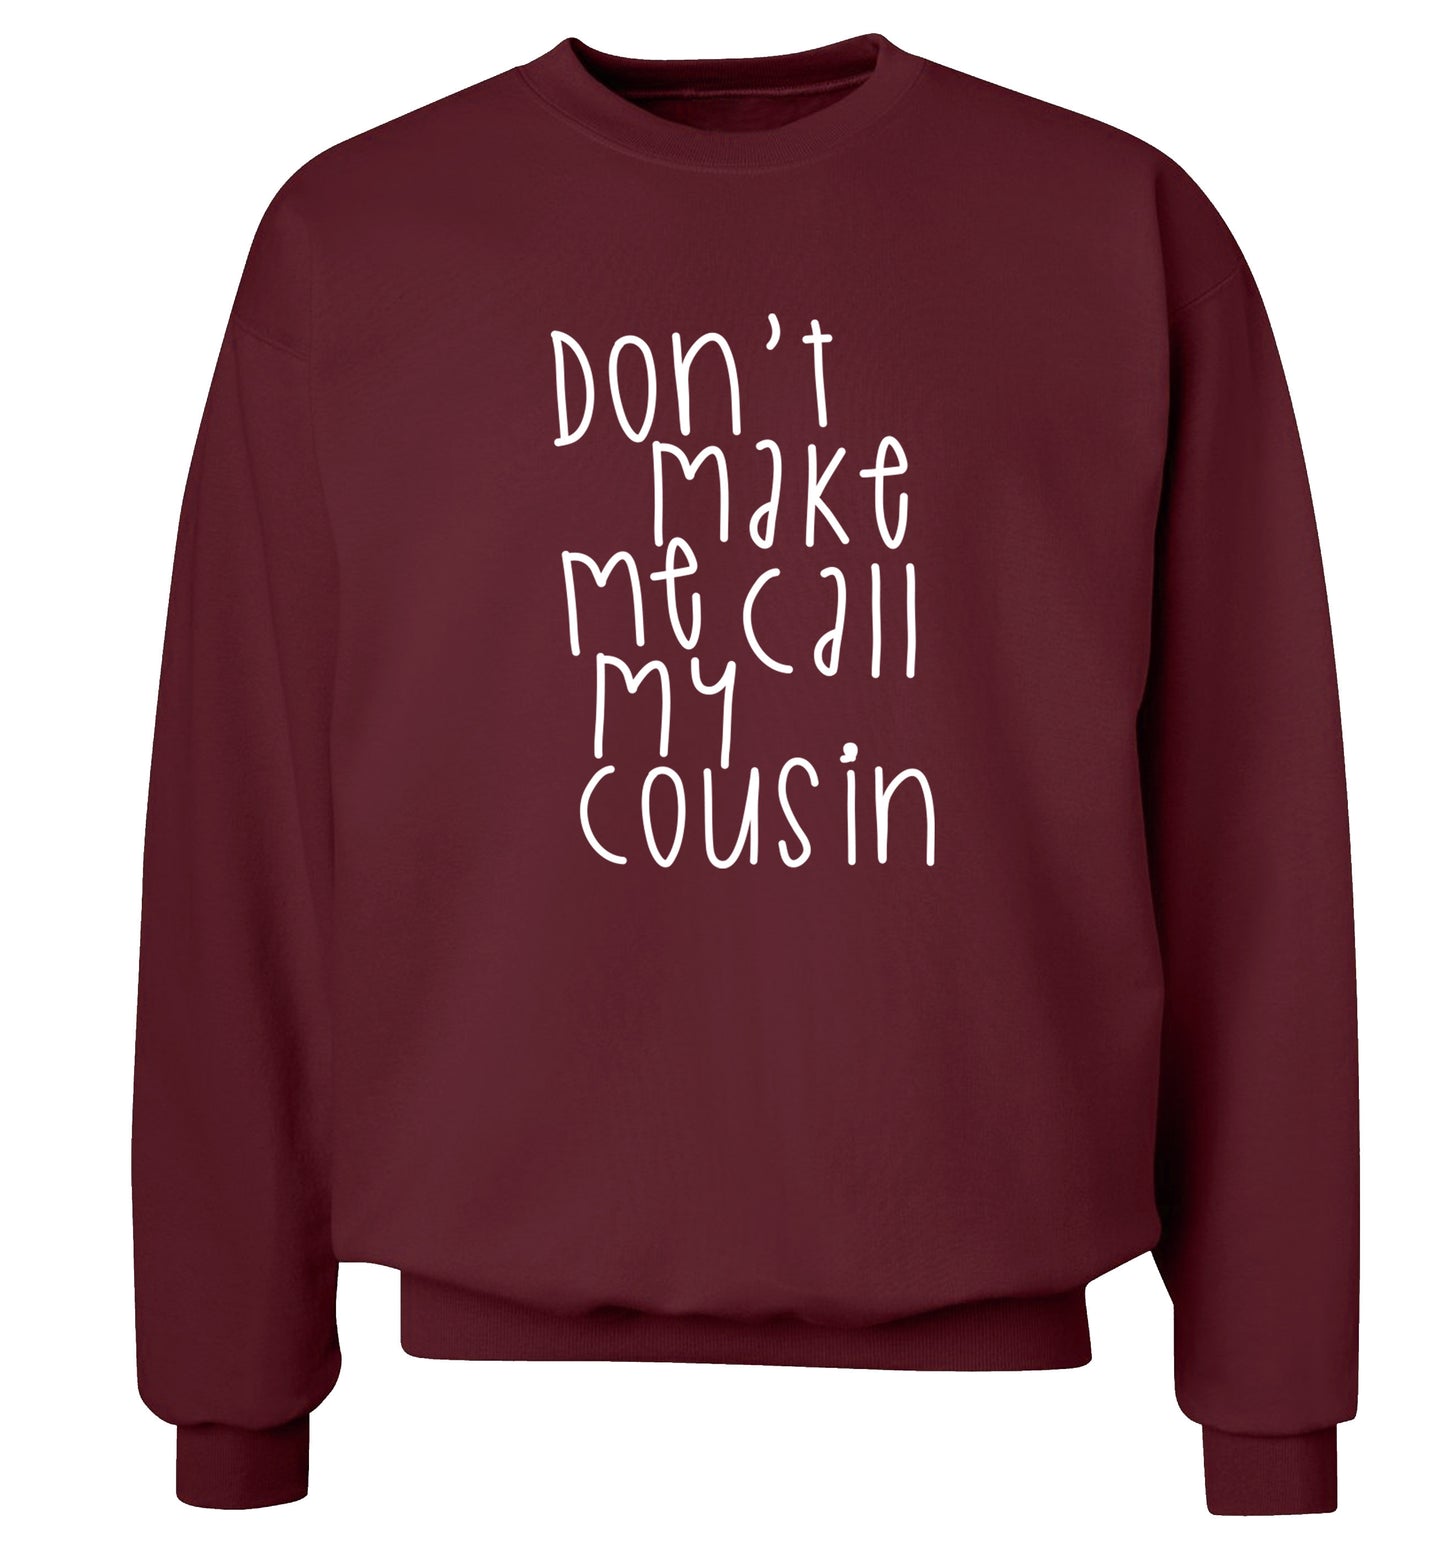 Don't make me call my cousin Adult's unisex maroon Sweater 2XL